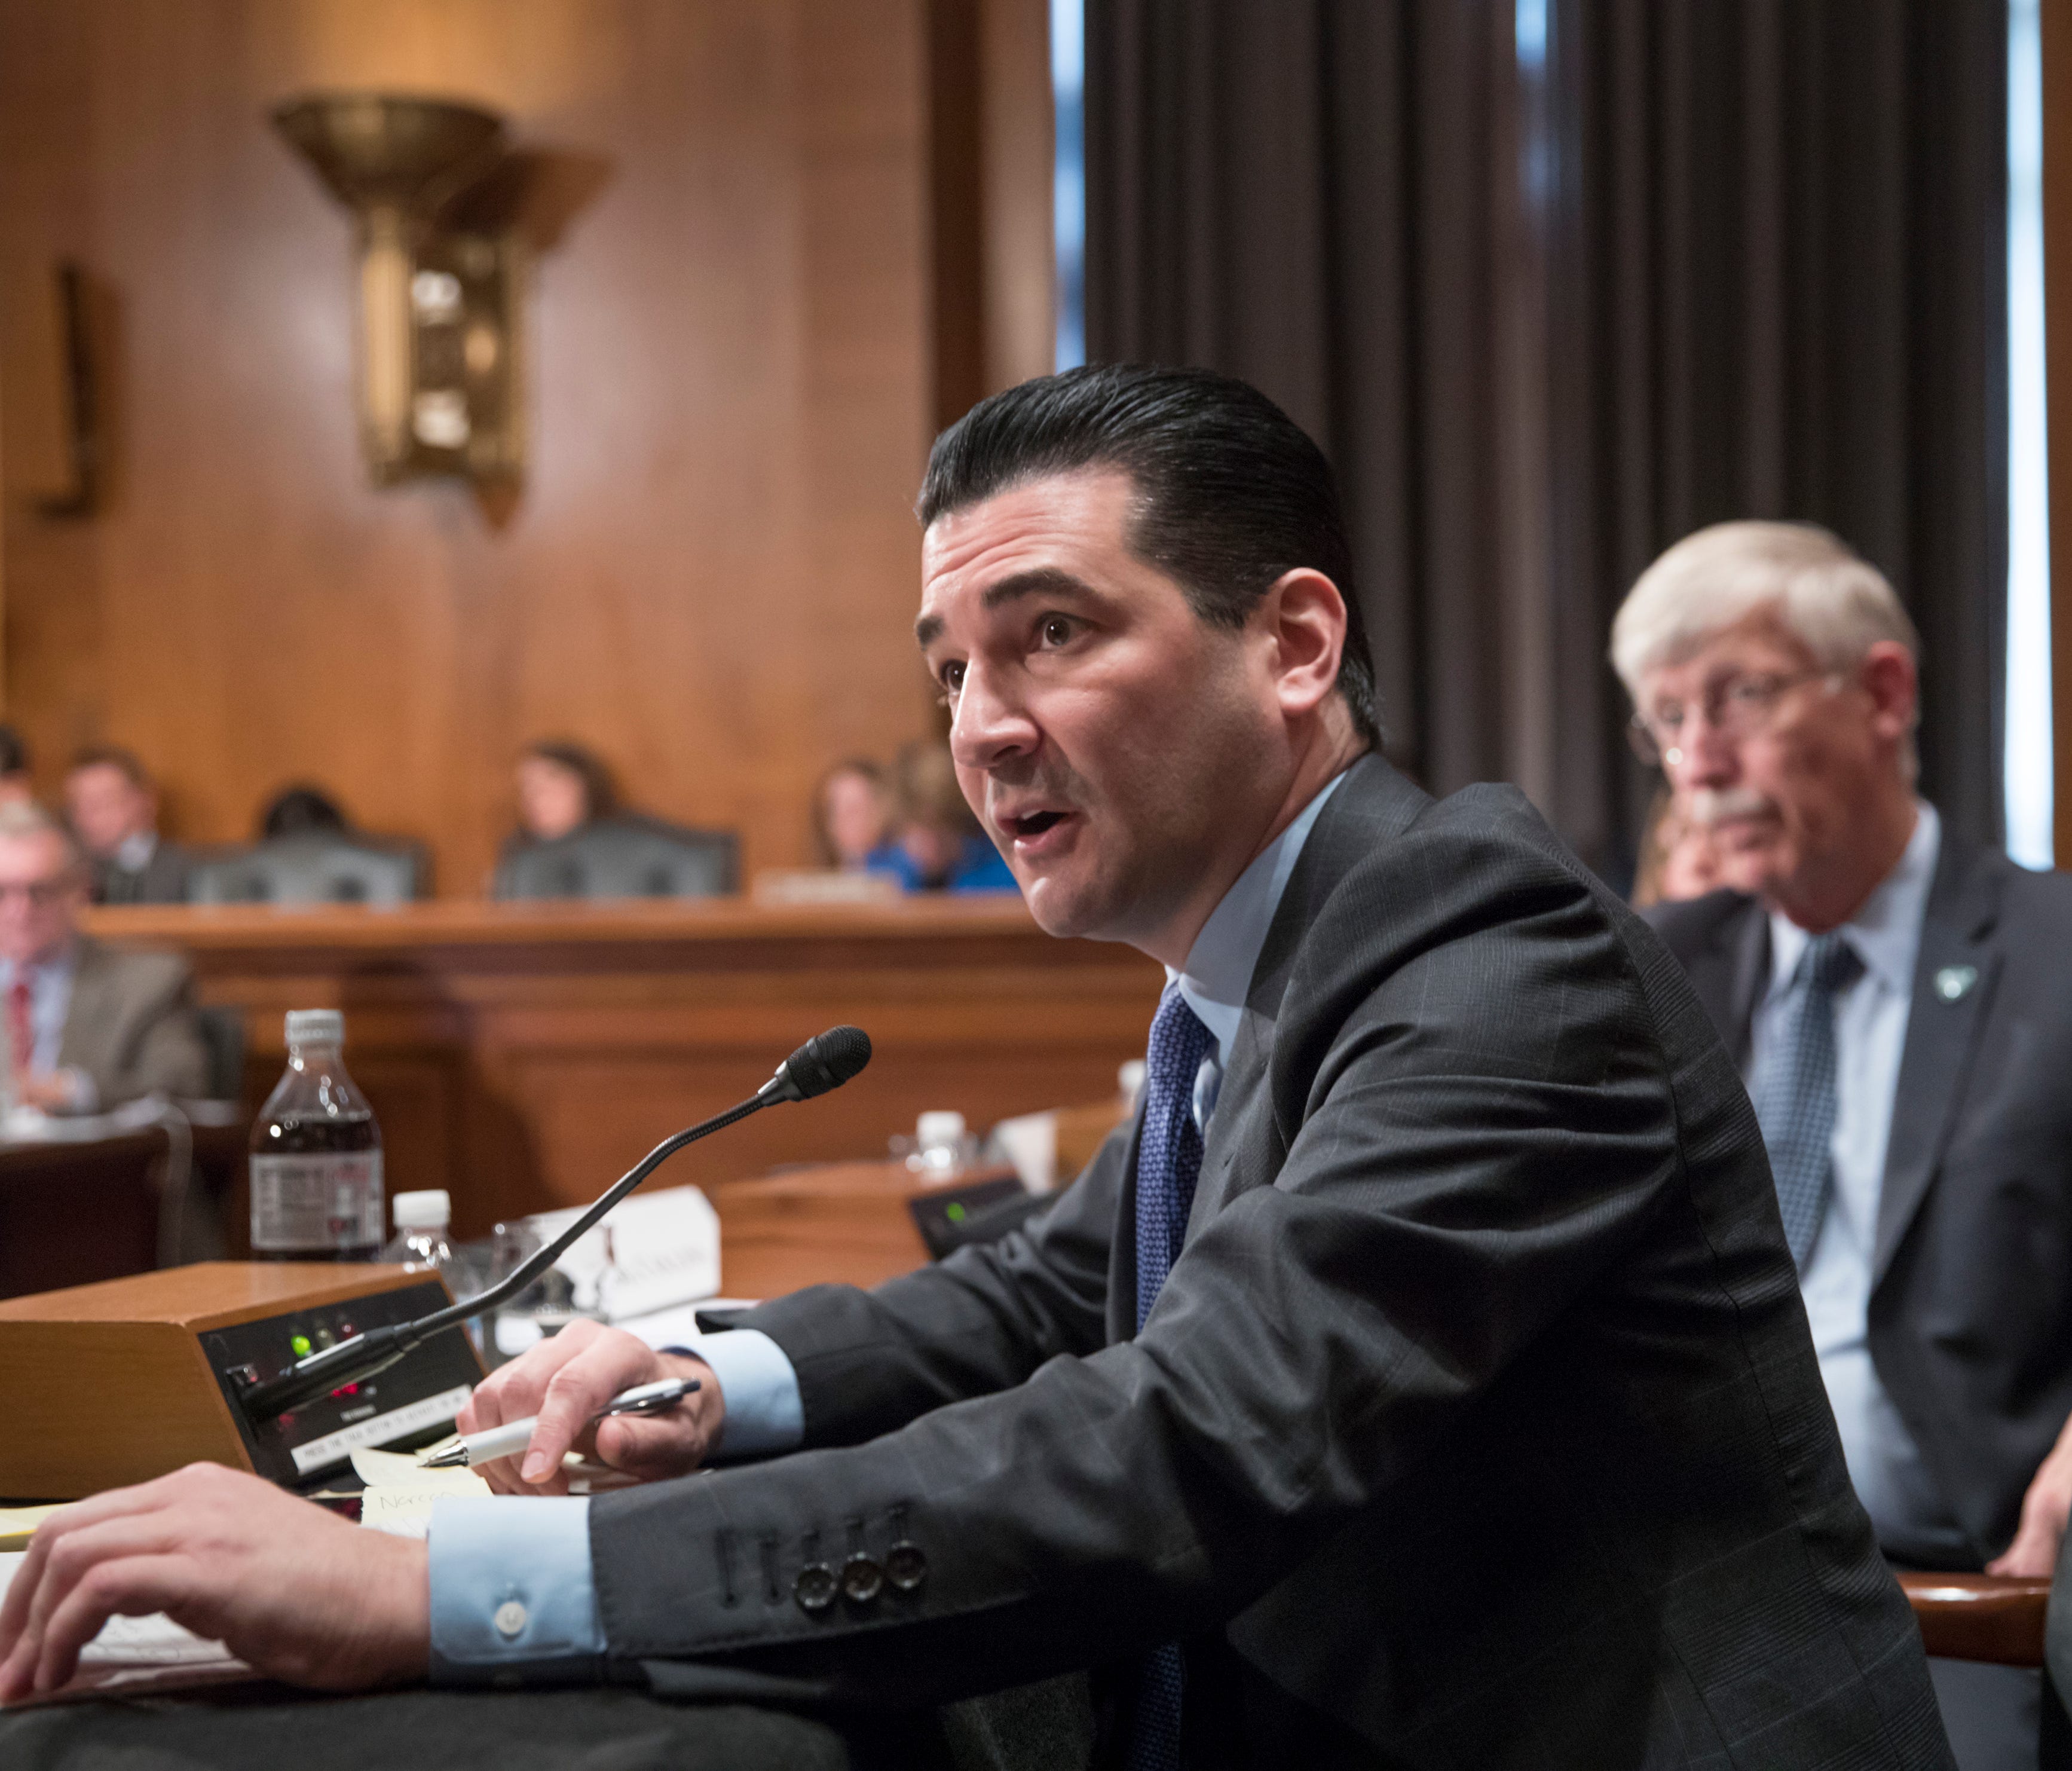 Scott Gottlieb, commissioner of the Food and Drug Administration, answers a question as the Senate Health, Education, Labor and Pensions Committee examines the federal response to the opioid addiction crisis on Oct. 5, 2017.